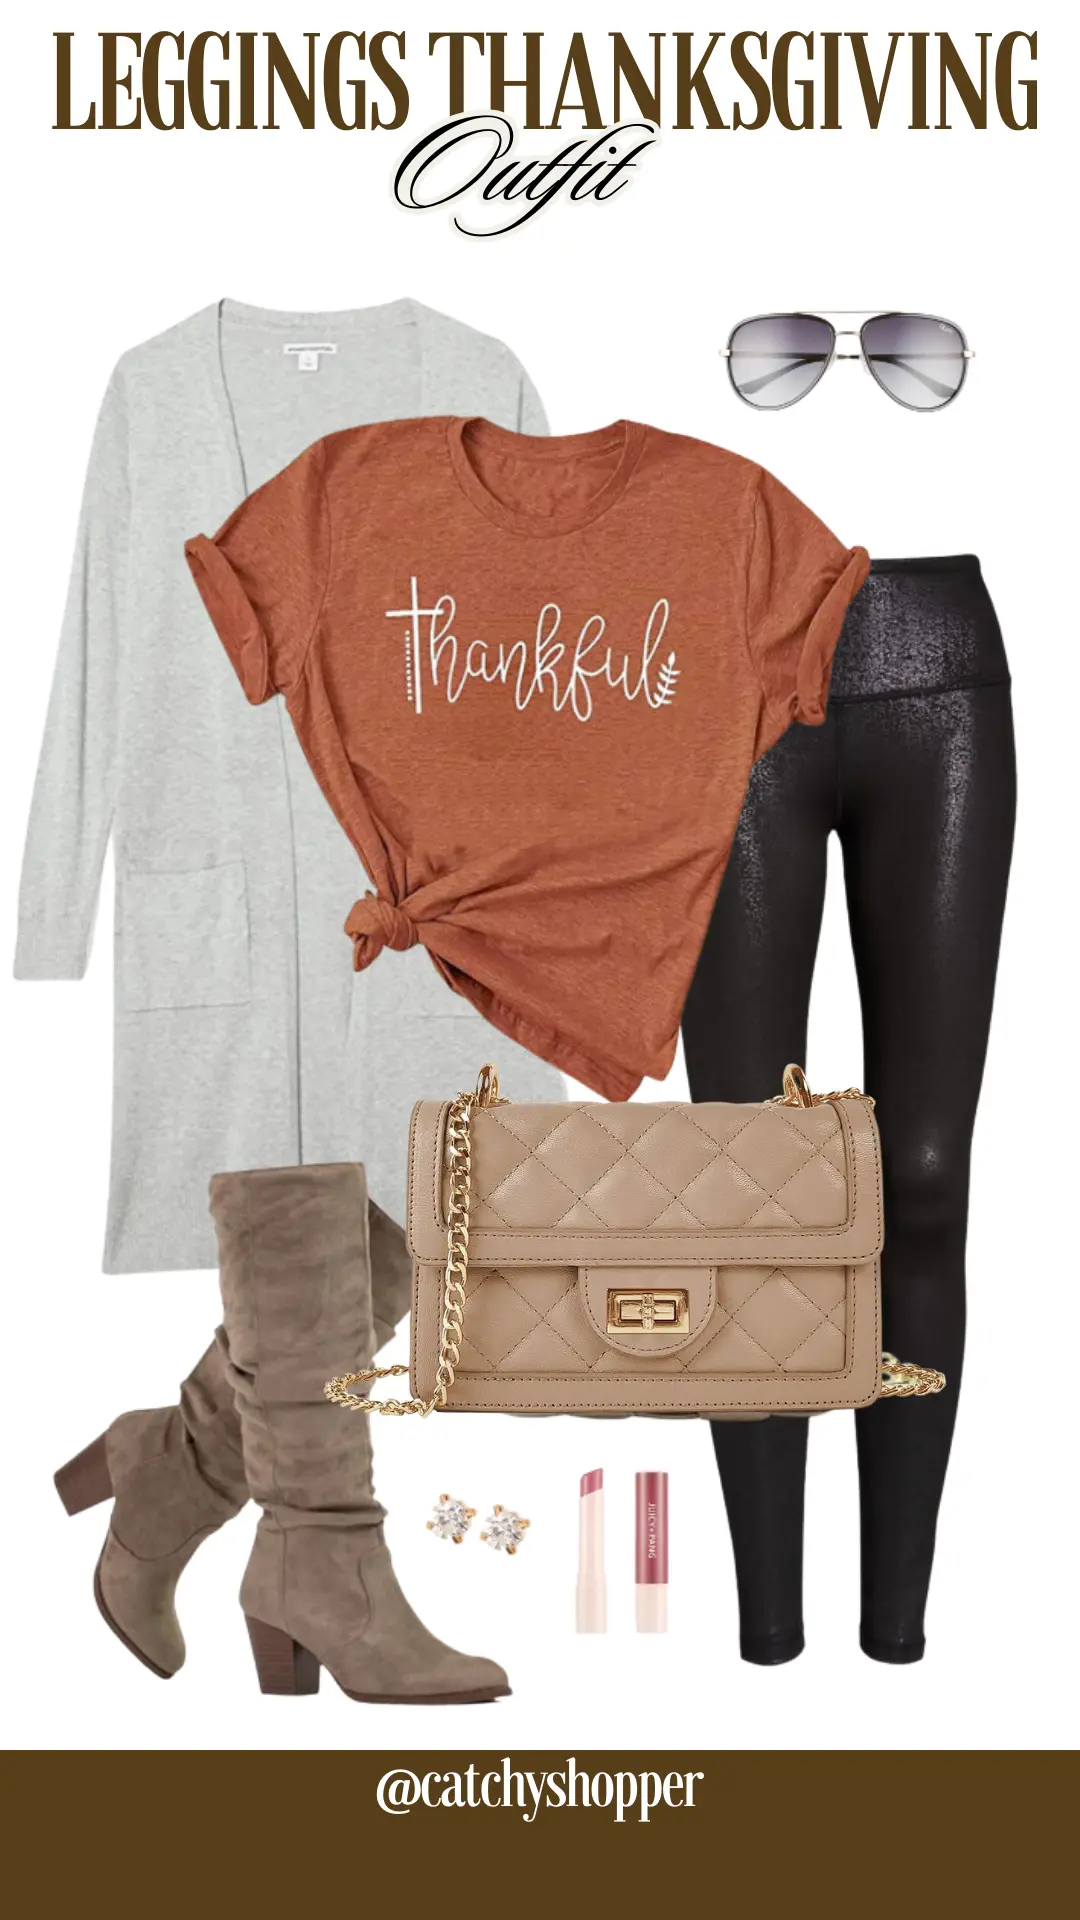 Leggings Thanksgiving Outfit